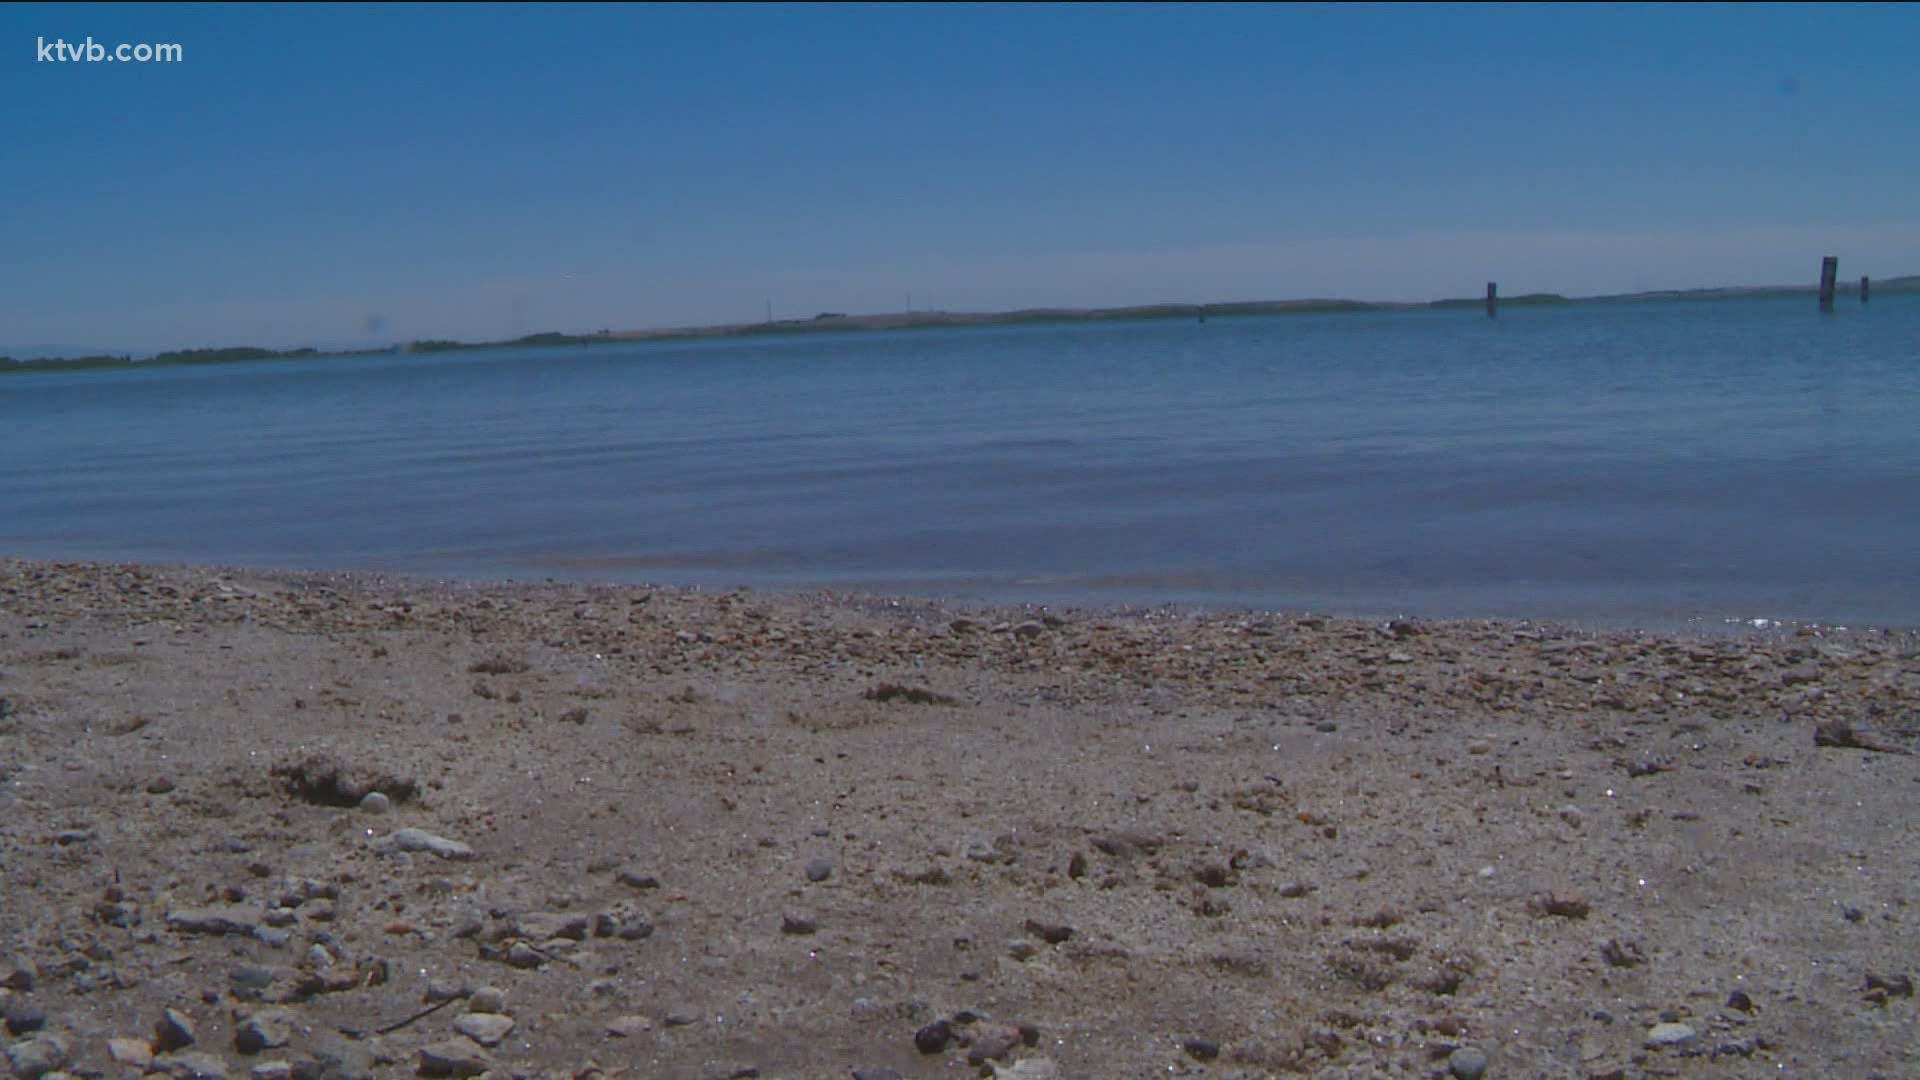 Juan Martinez recruited his family to help him clean up the trash that was bothering him along Lake Lowell. He says it feels amazing to give back to his community.